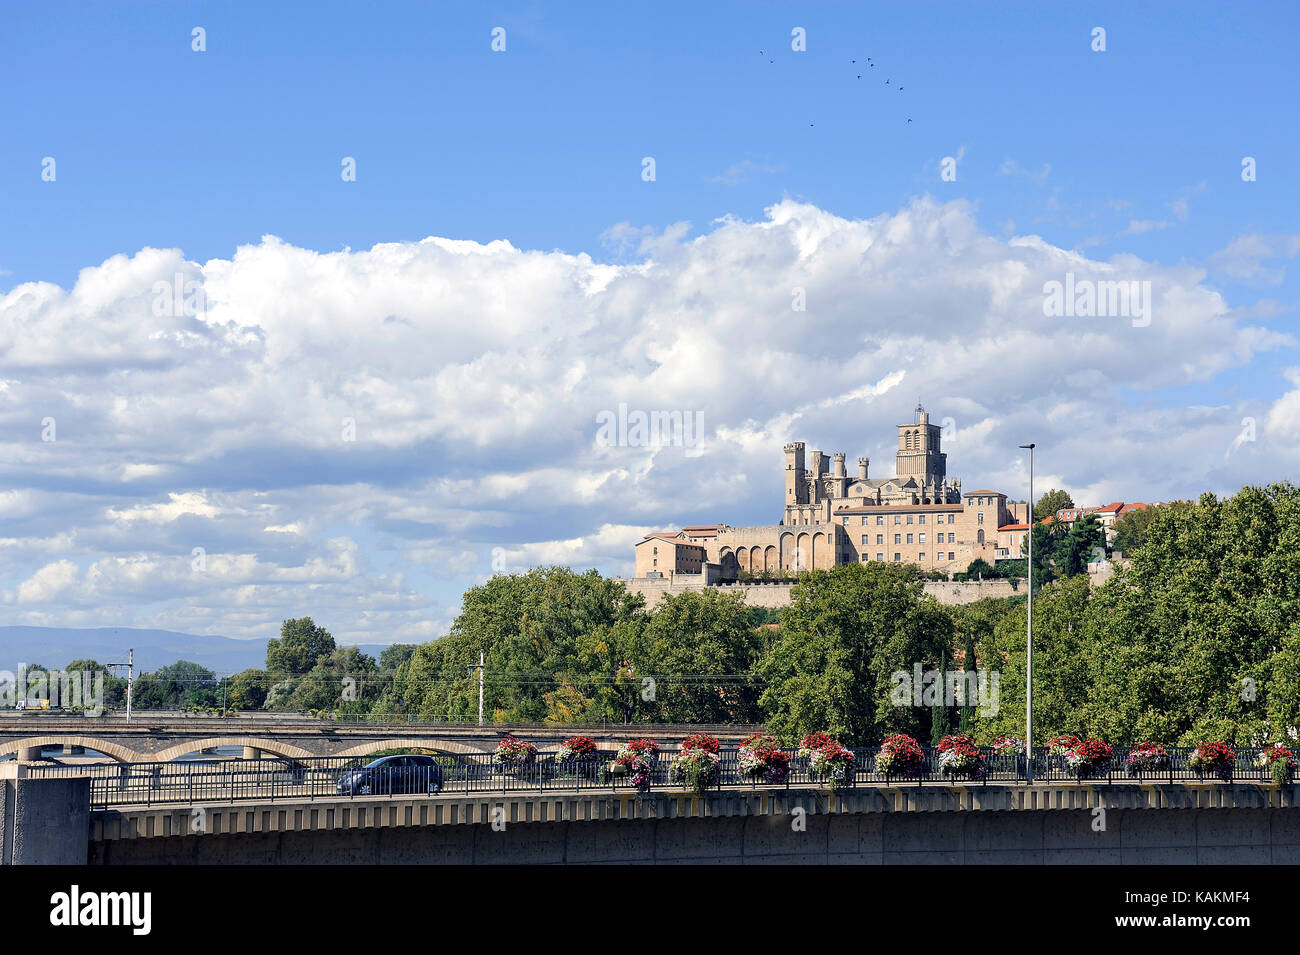 The cathedral Saint-Nazaire de Beziers seen from the canal bridge Stock Photo